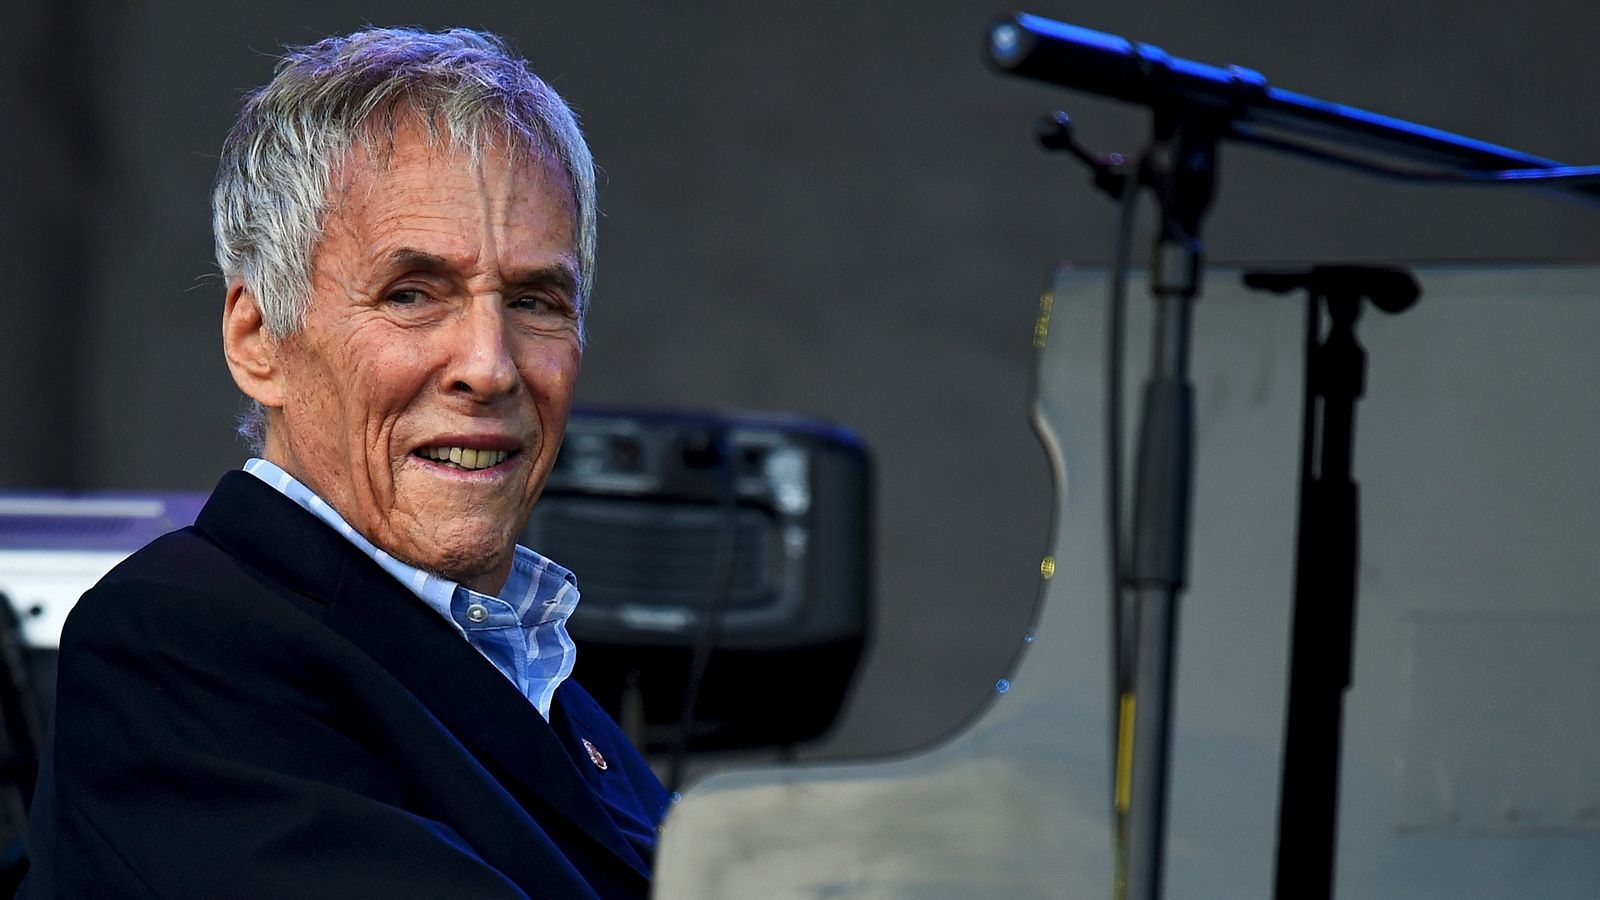 Burt Bacharach dies aged 94: Composer was behind hits including I Say A Little Prayer and Raindrops Keep Fallin' On My Head